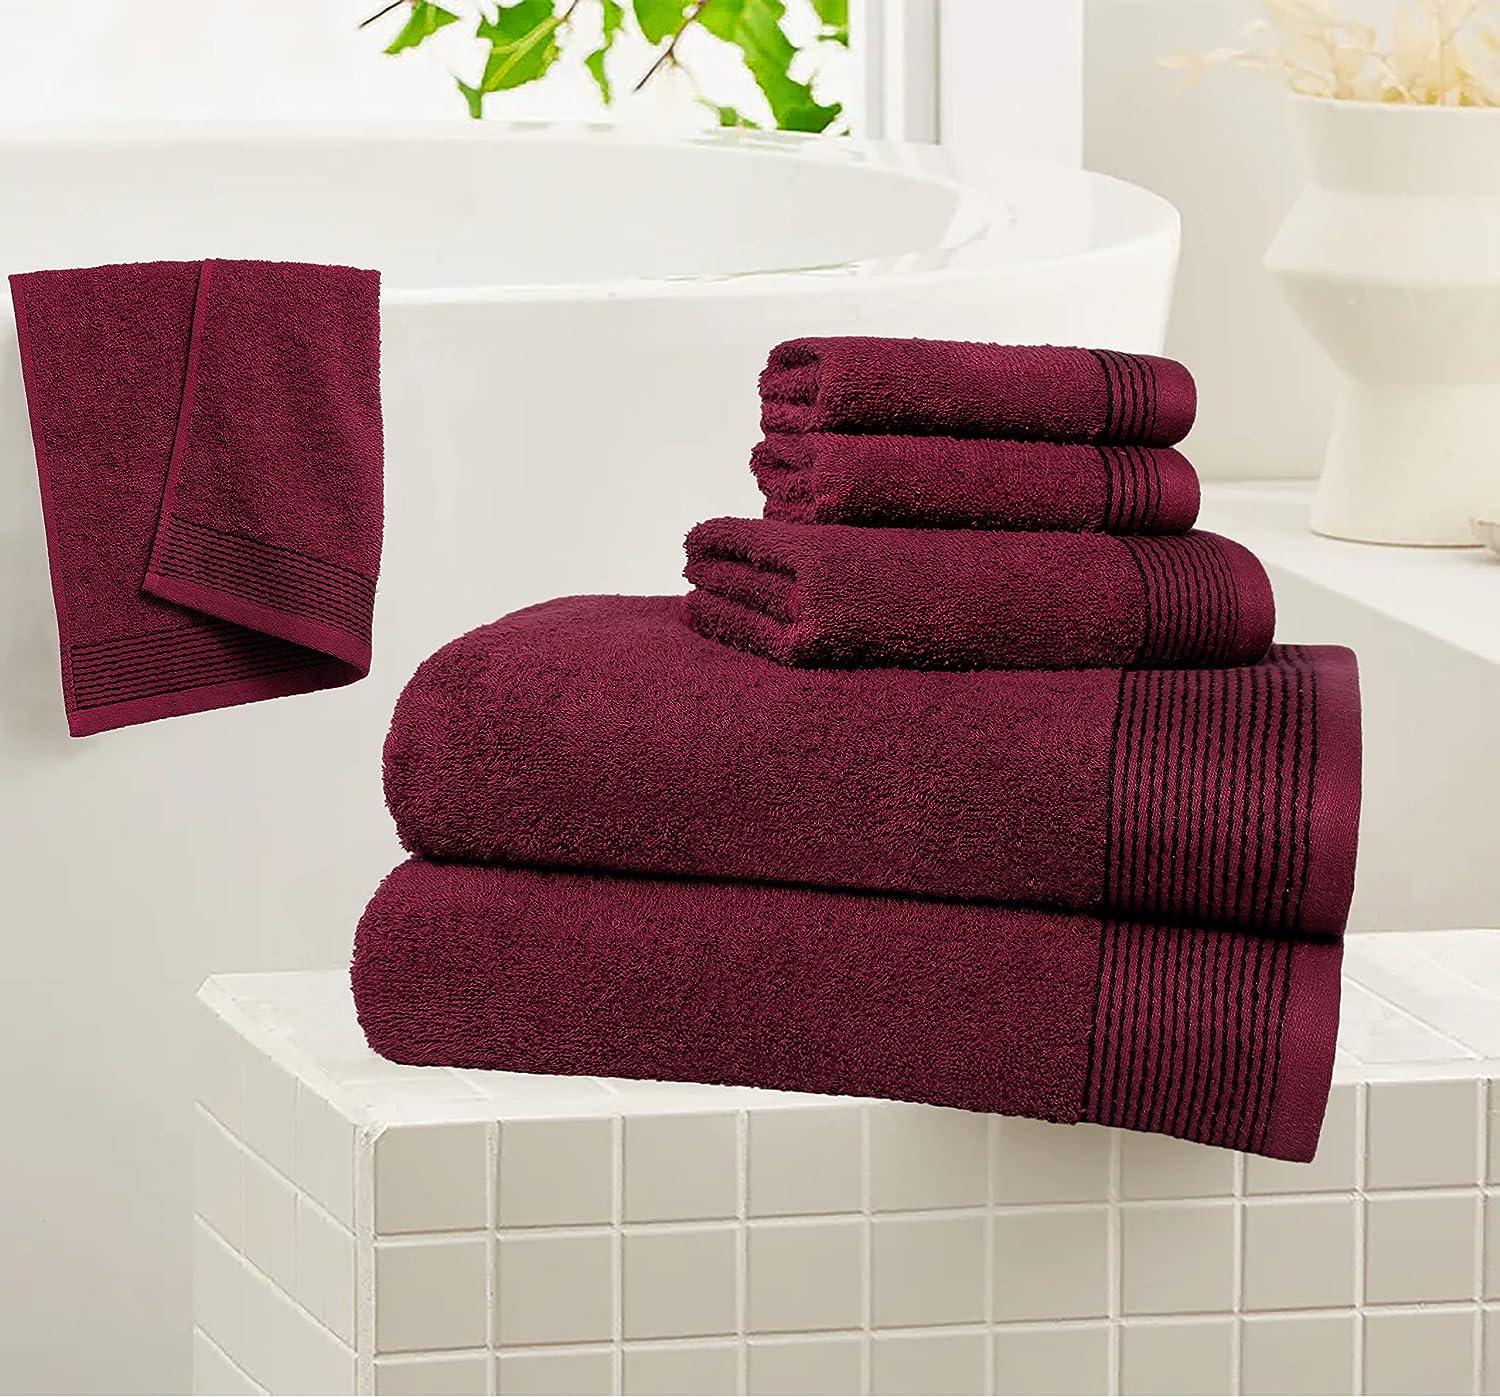  BELIZZI HOME 100% Cotton Ultra Soft 6 Pack Towel Set, Contains  2 Bath Towels 28x55 inchs, 2 Hand Towels 16x24 inchs & 2 Washcloths 12x12  inchs, Compact Lightweight & Highly Absorbant 